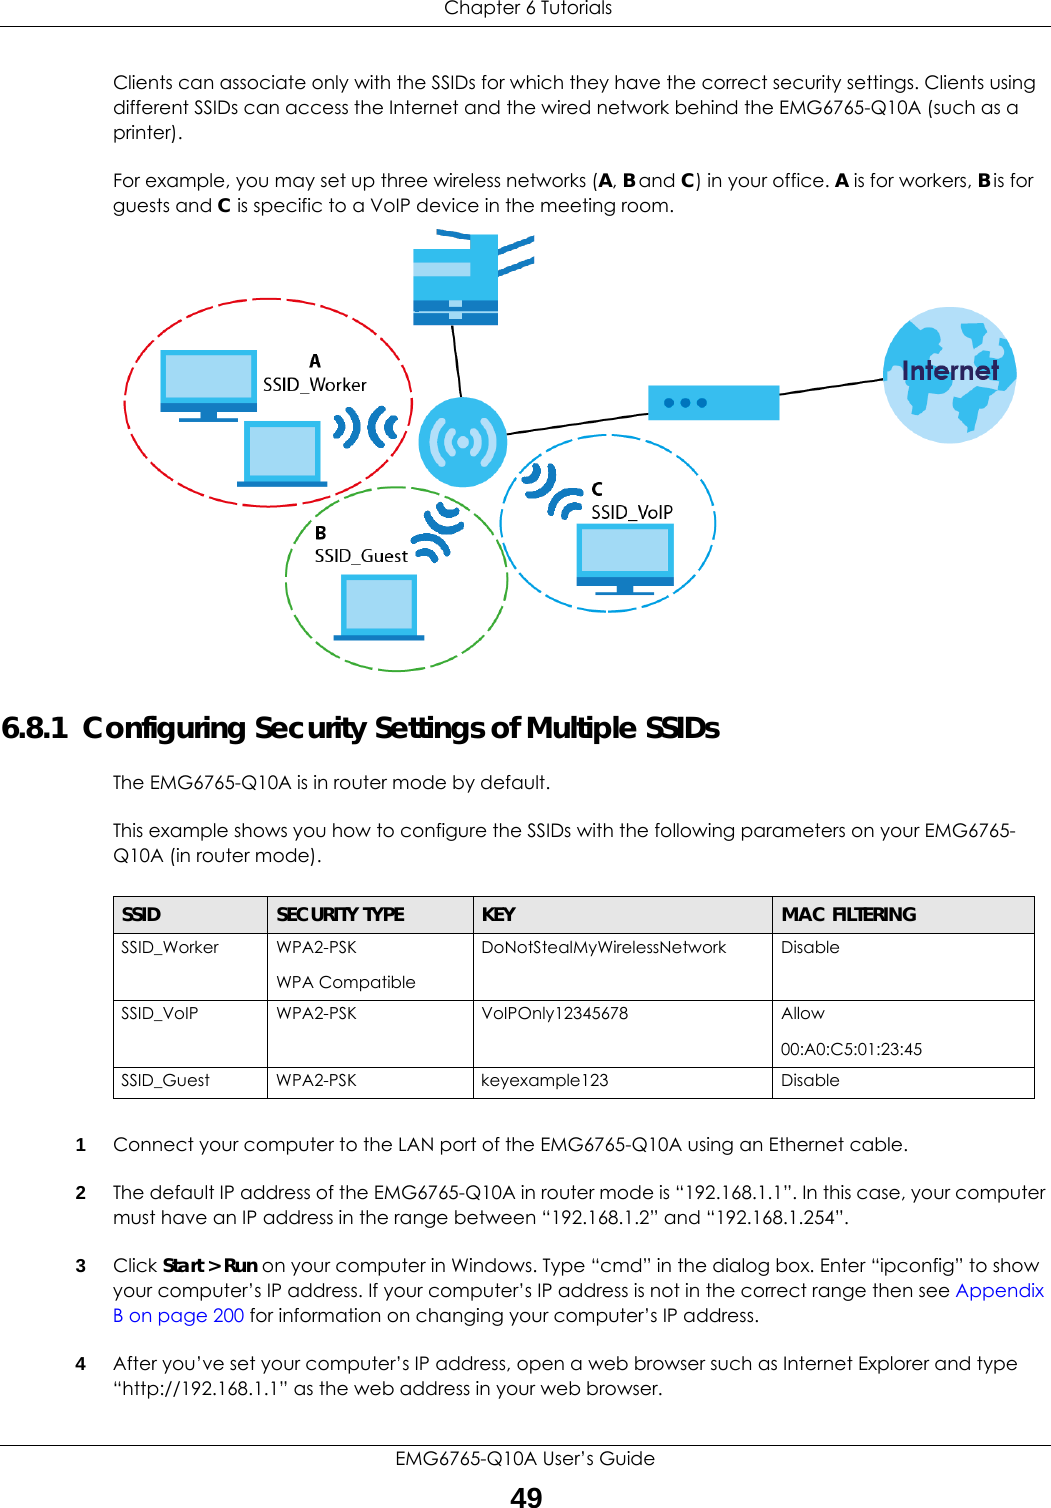  Chapter 6 TutorialsEMG6765-Q10A User’s Guide49Clients can associate only with the SSIDs for which they have the correct security settings. Clients using different SSIDs can access the Internet and the wired network behind the EMG6765-Q10A (such as a printer). For example, you may set up three wireless networks (A, B and C) in your office. A is for workers, B is for guests and C is specific to a VoIP device in the meeting room. 6.8.1  Configuring Security Settings of Multiple SSIDsThe EMG6765-Q10A is in router mode by default.This example shows you how to configure the SSIDs with the following parameters on your EMG6765-Q10A (in router mode).1Connect your computer to the LAN port of the EMG6765-Q10A using an Ethernet cable. 2The default IP address of the EMG6765-Q10A in router mode is “192.168.1.1”. In this case, your computer must have an IP address in the range between “192.168.1.2” and “192.168.1.254”.3Click Start &gt; Run on your computer in Windows. Type “cmd” in the dialog box. Enter “ipconfig” to show your computer’s IP address. If your computer’s IP address is not in the correct range then see Appendix B on page 200 for information on changing your computer’s IP address.4After you’ve set your computer’s IP address, open a web browser such as Internet Explorer and type “http://192.168.1.1” as the web address in your web browser.SSID SECURITY TYPE KEY MAC FILTERINGSSID_Worker WPA2-PSKWPA Compatible DoNotStealMyWirelessNetwork DisableSSID_VoIP WPA2-PSK VoIPOnly12345678 Allow00:A0:C5:01:23:45SSID_Guest WPA2-PSK keyexample123 Disable